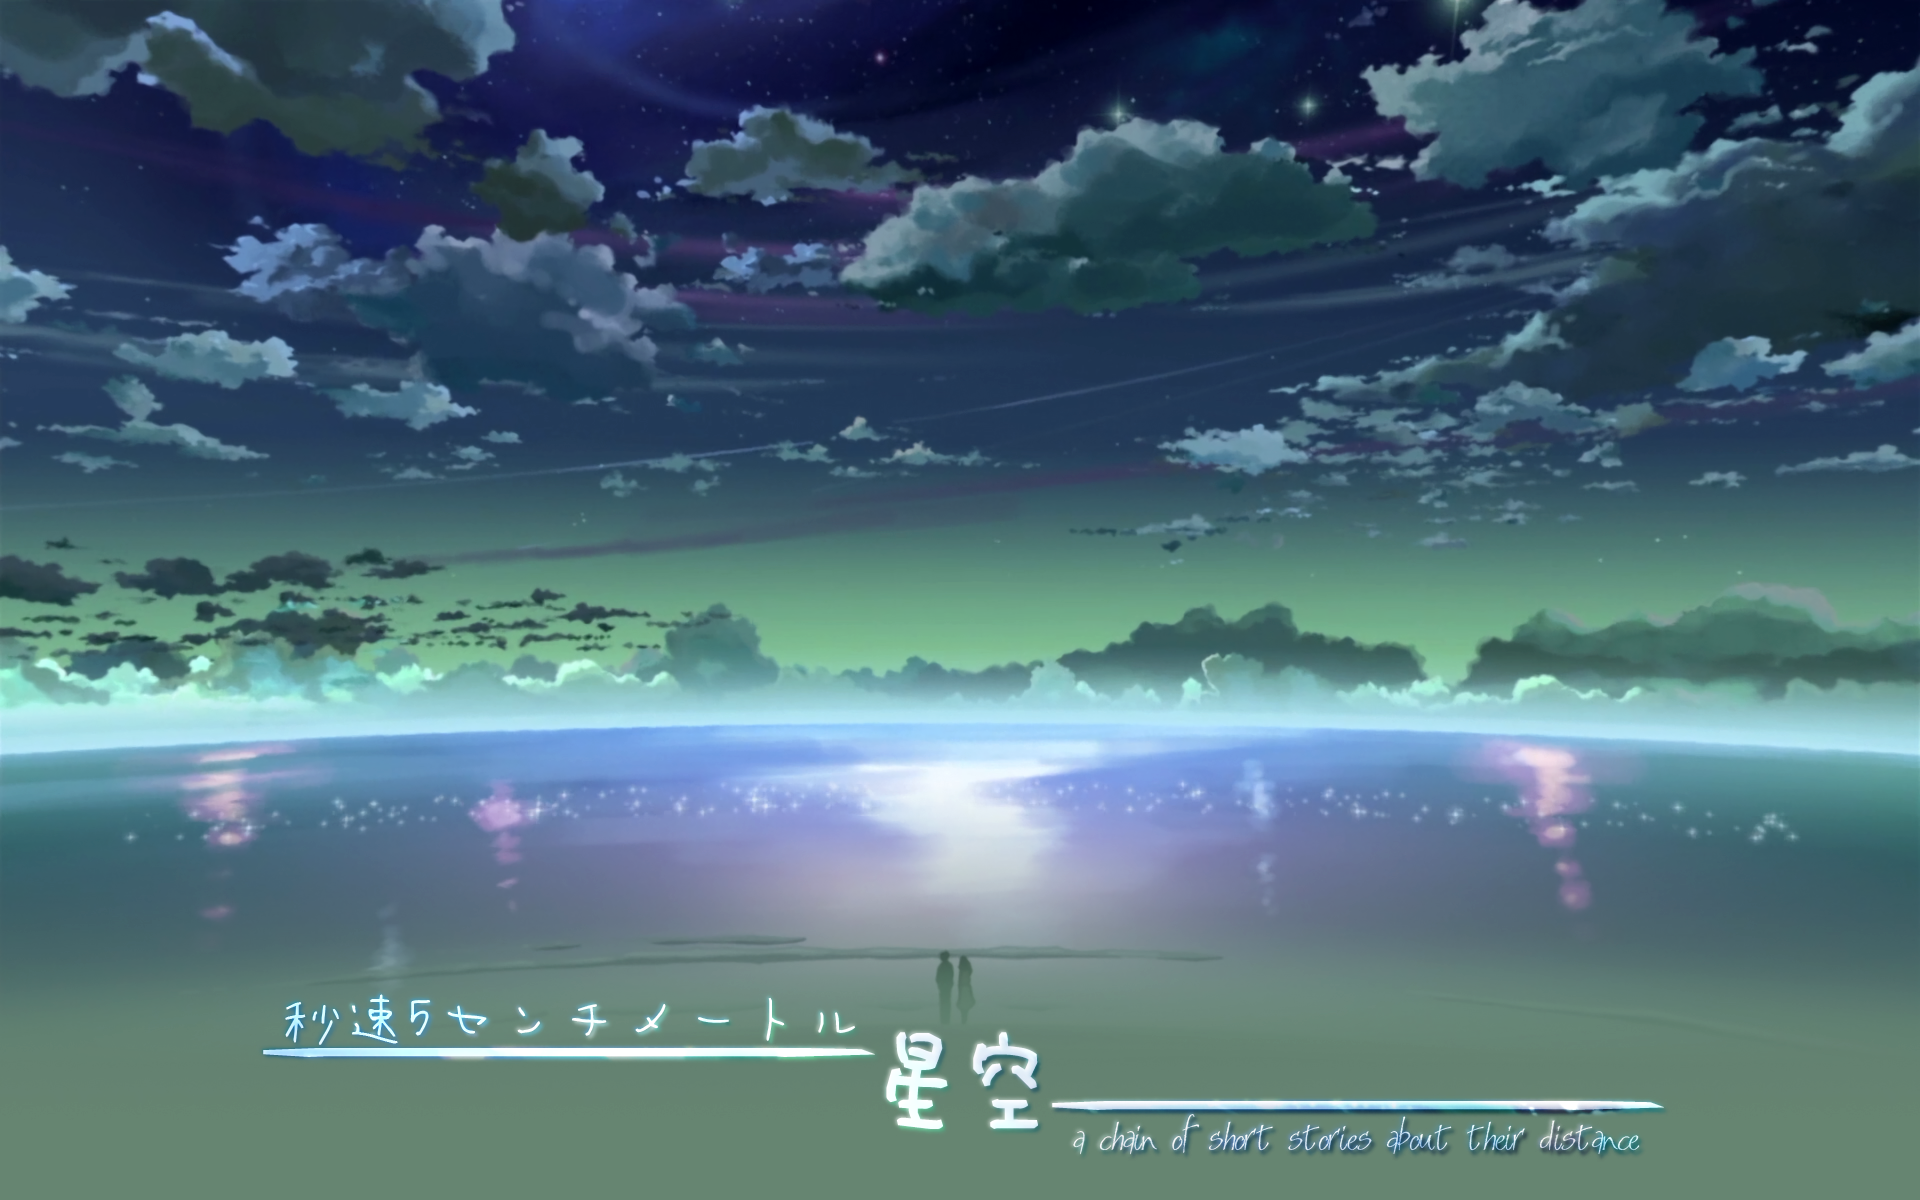 5 Centimeters Per Second Hd Wallpaper Background Image 19x10